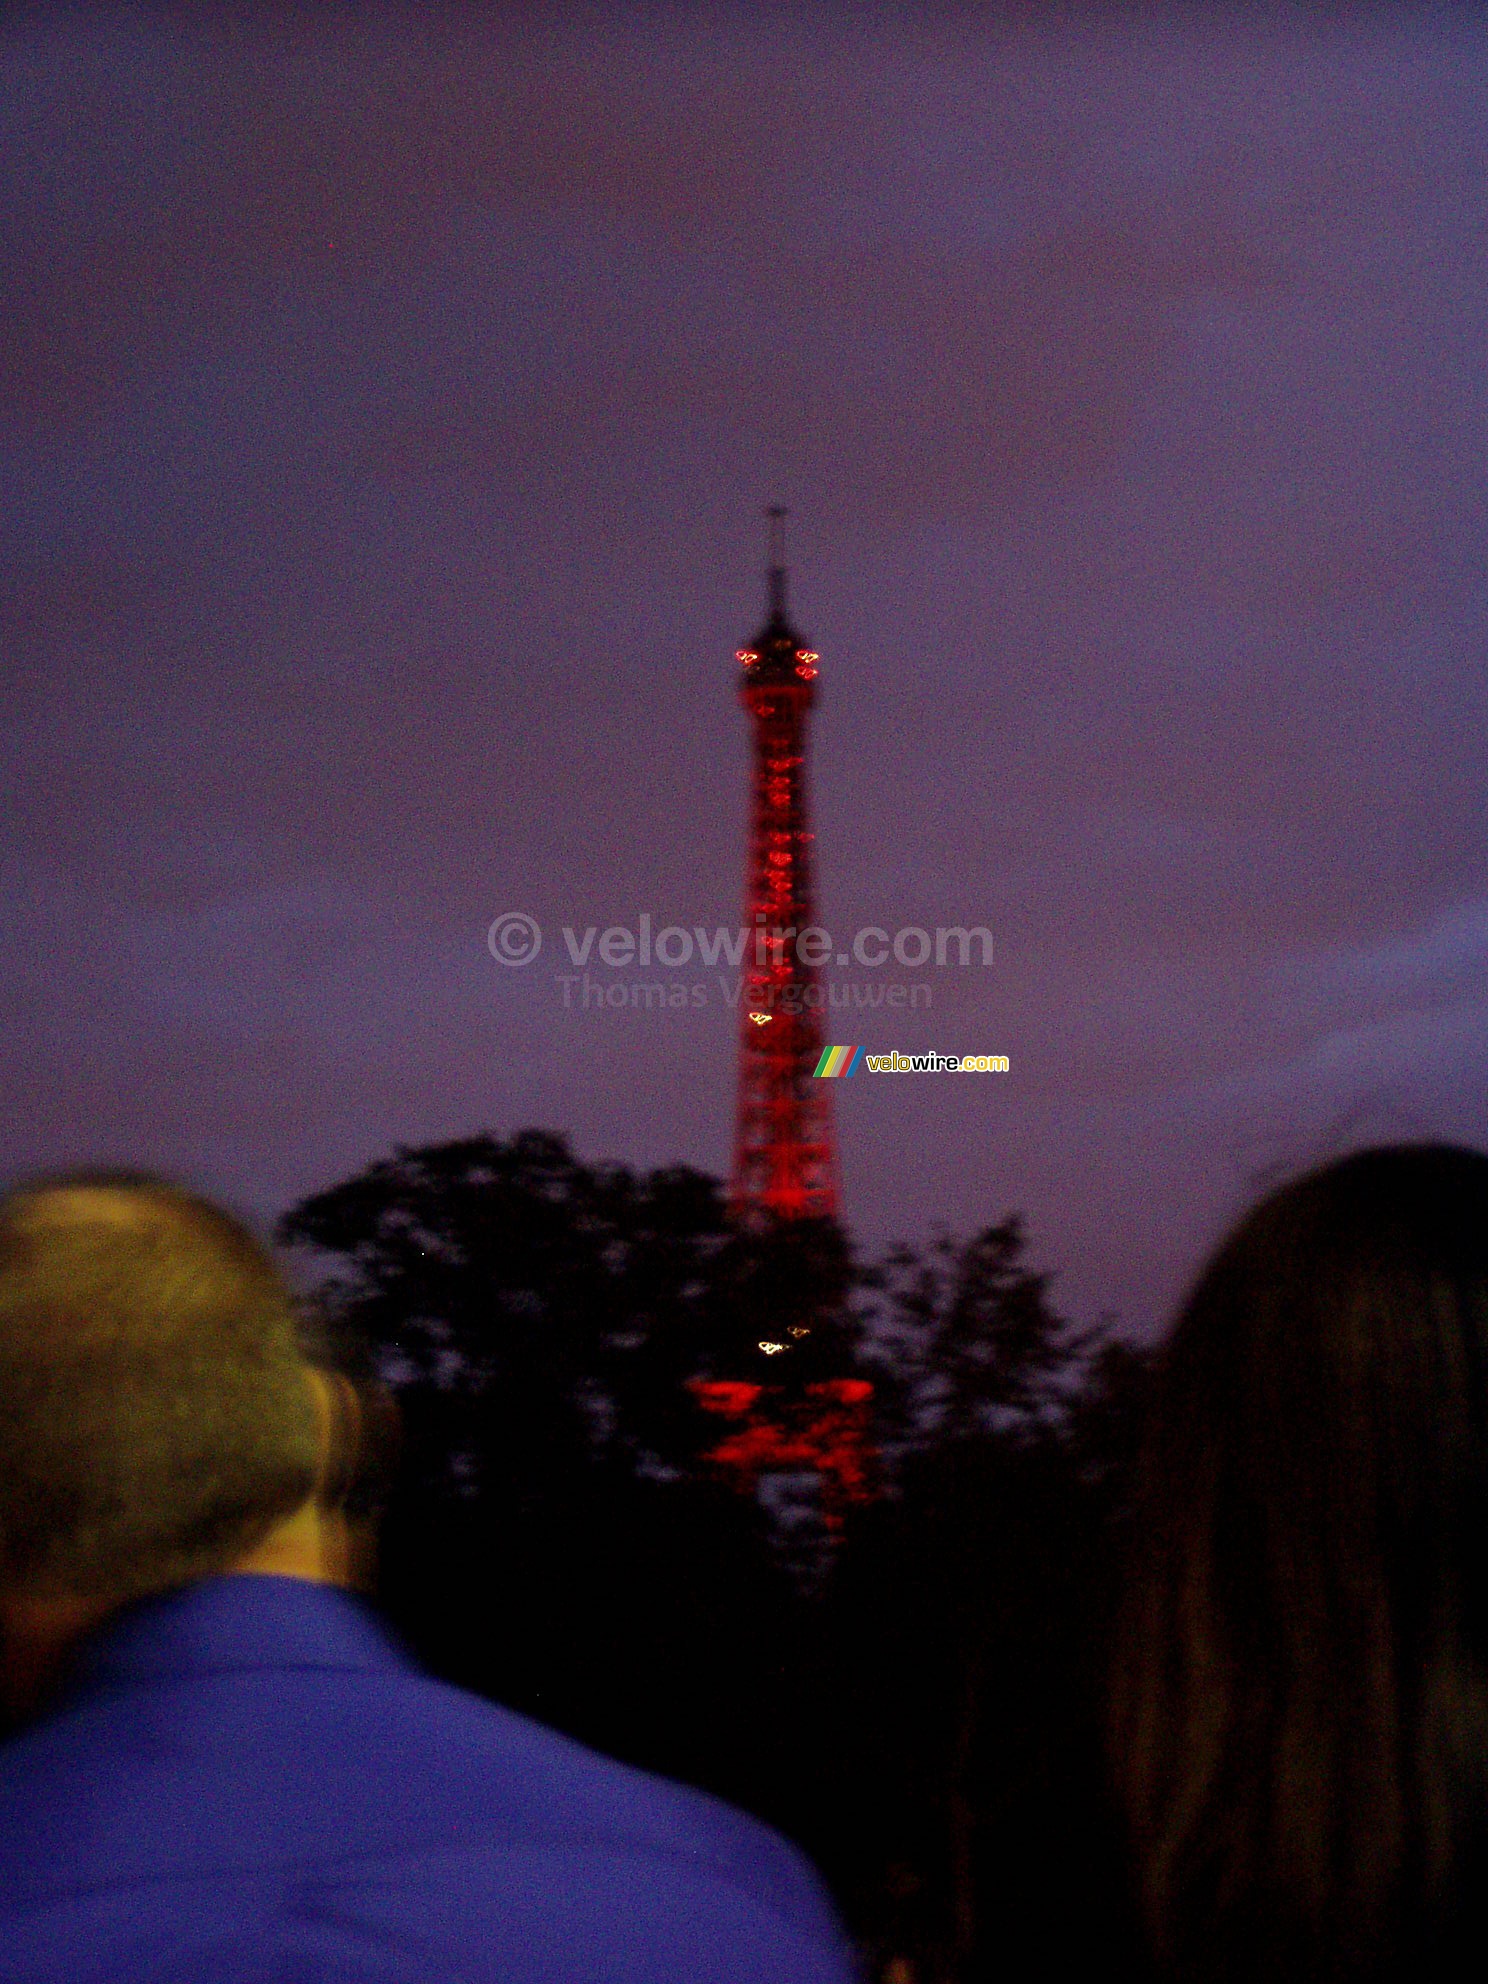 The Eiffel tower in red light just before the firworks started